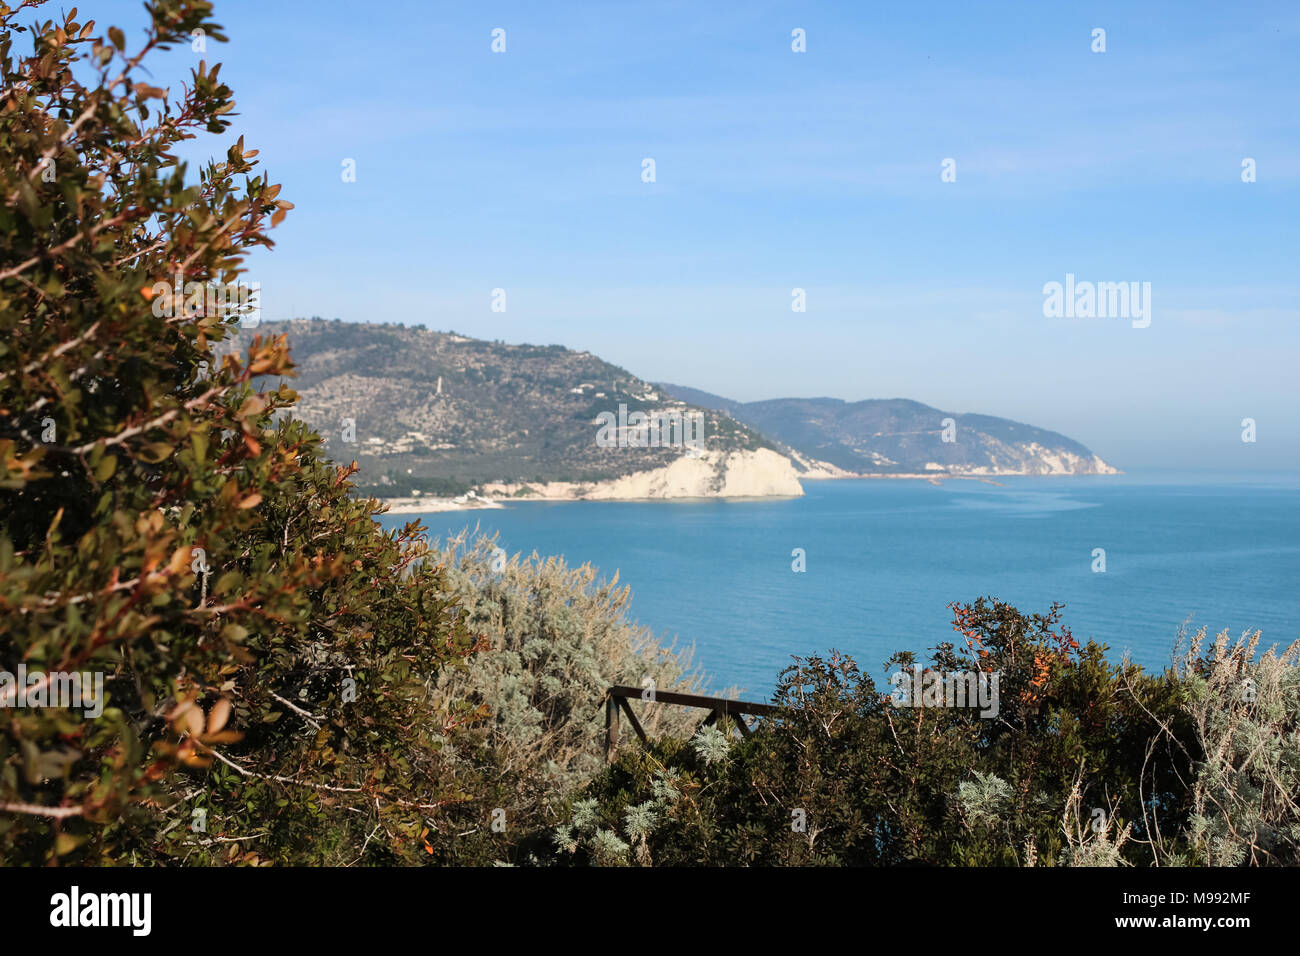 View towards farther cliffs in proximity of the city of Mattinata Stock Photo